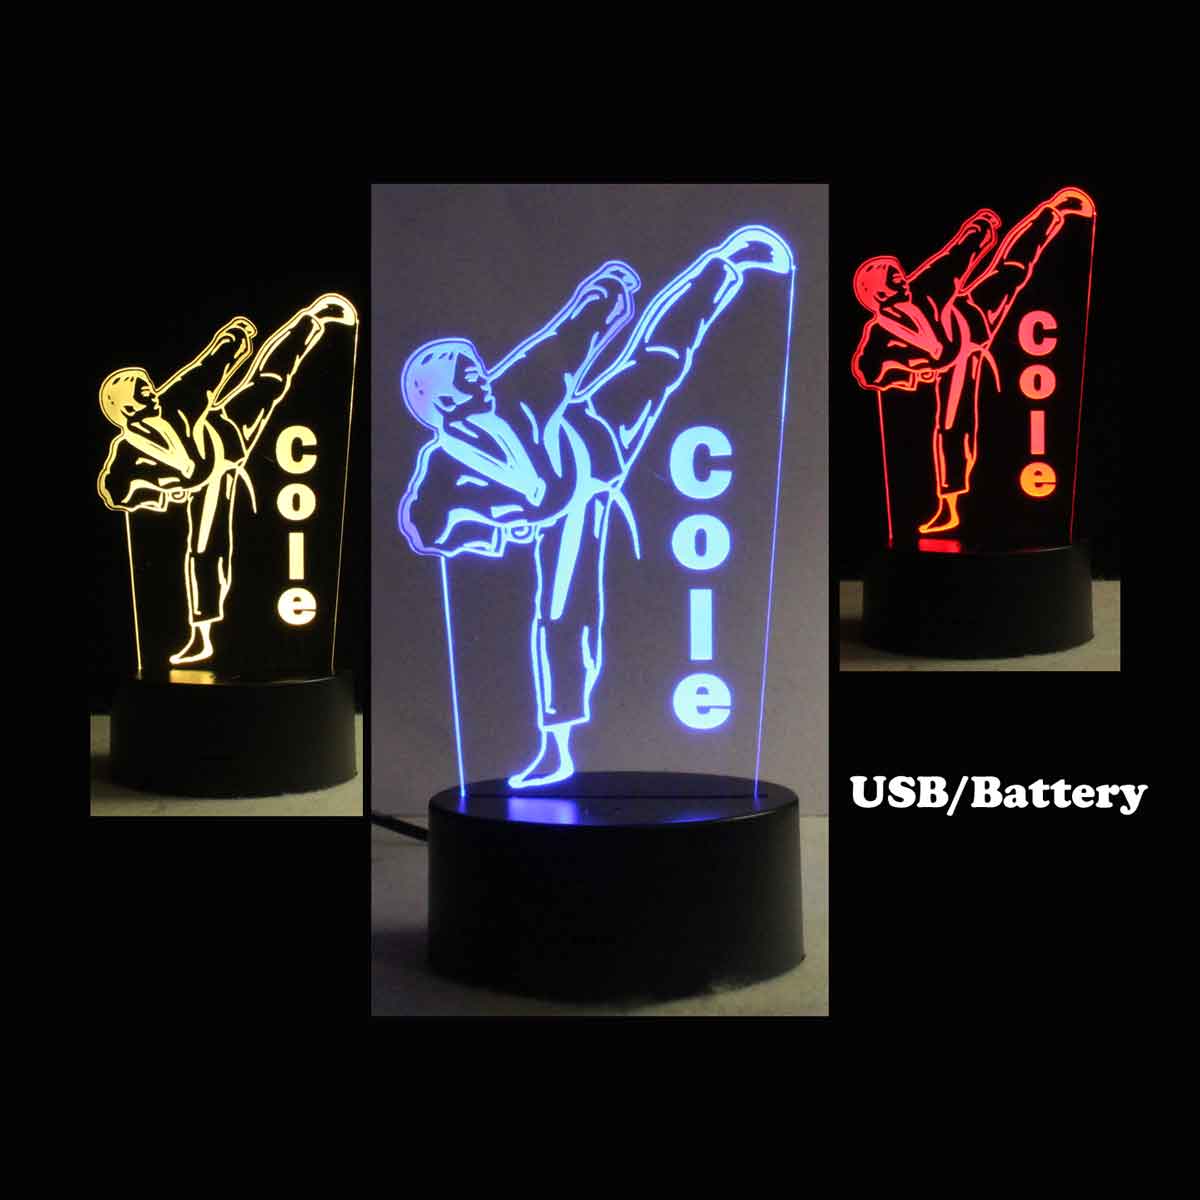 Karate Personalized USB/battery operated Table Top Martial arts night light